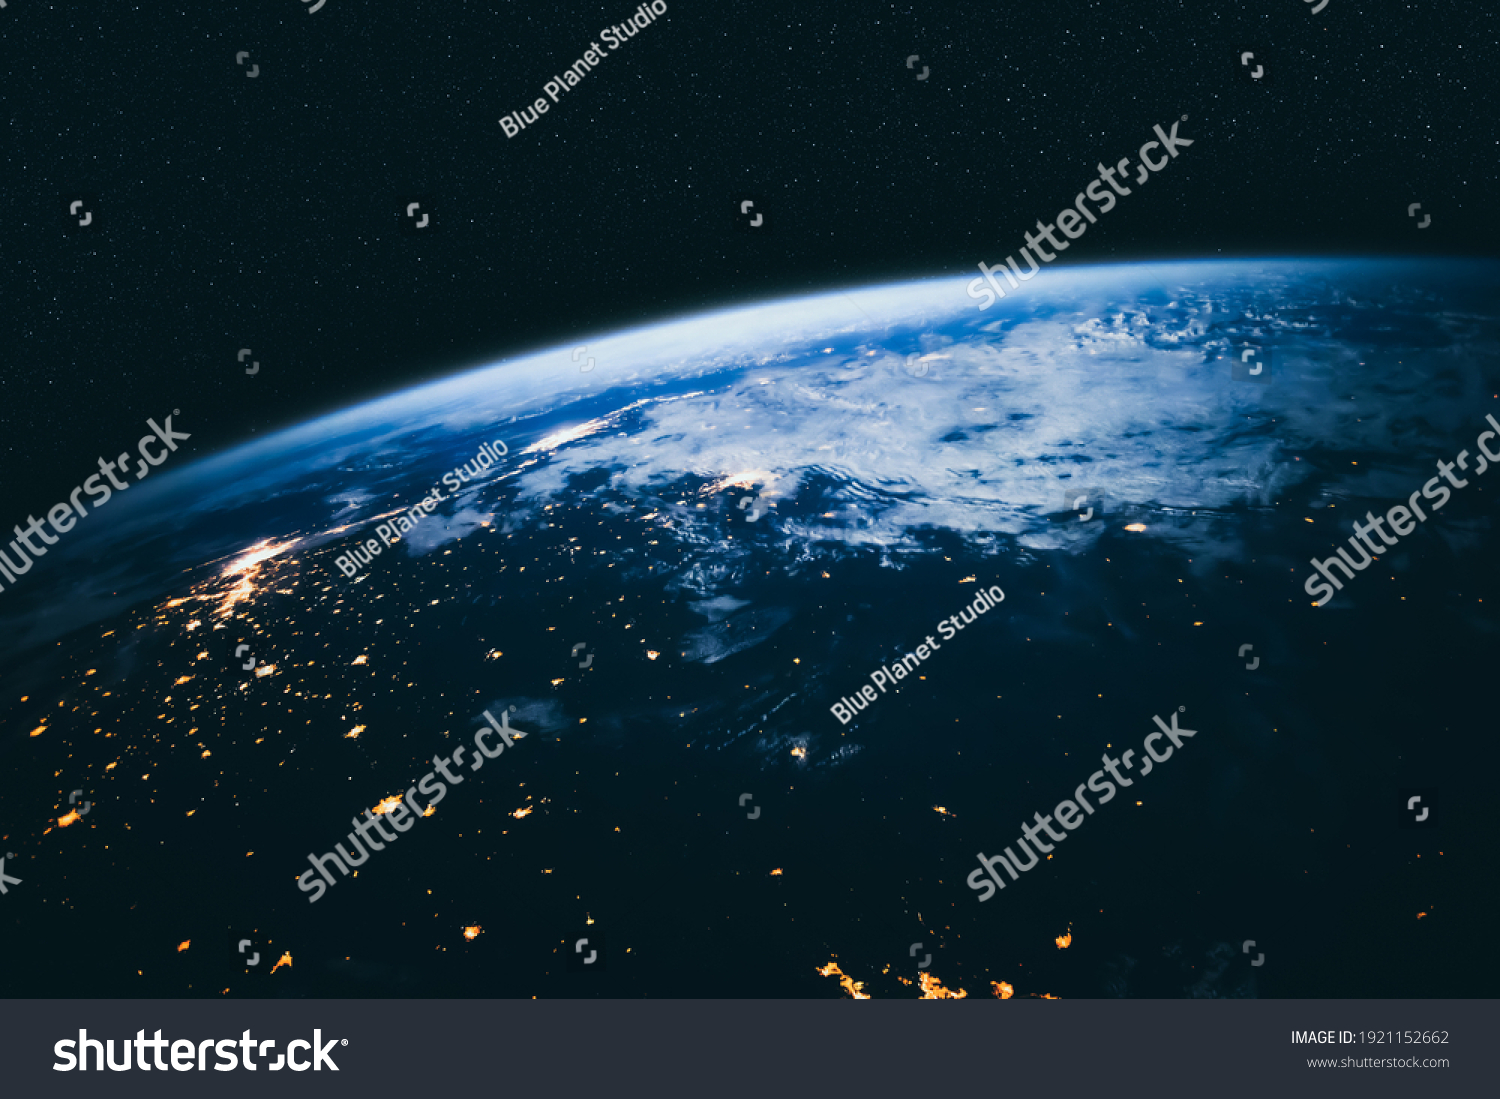 Planet earth globe view from space showing realistic earth surface and world map as in outer space point of view . Elements of this image furnished by NASA planet earth from space photos. #1921152662